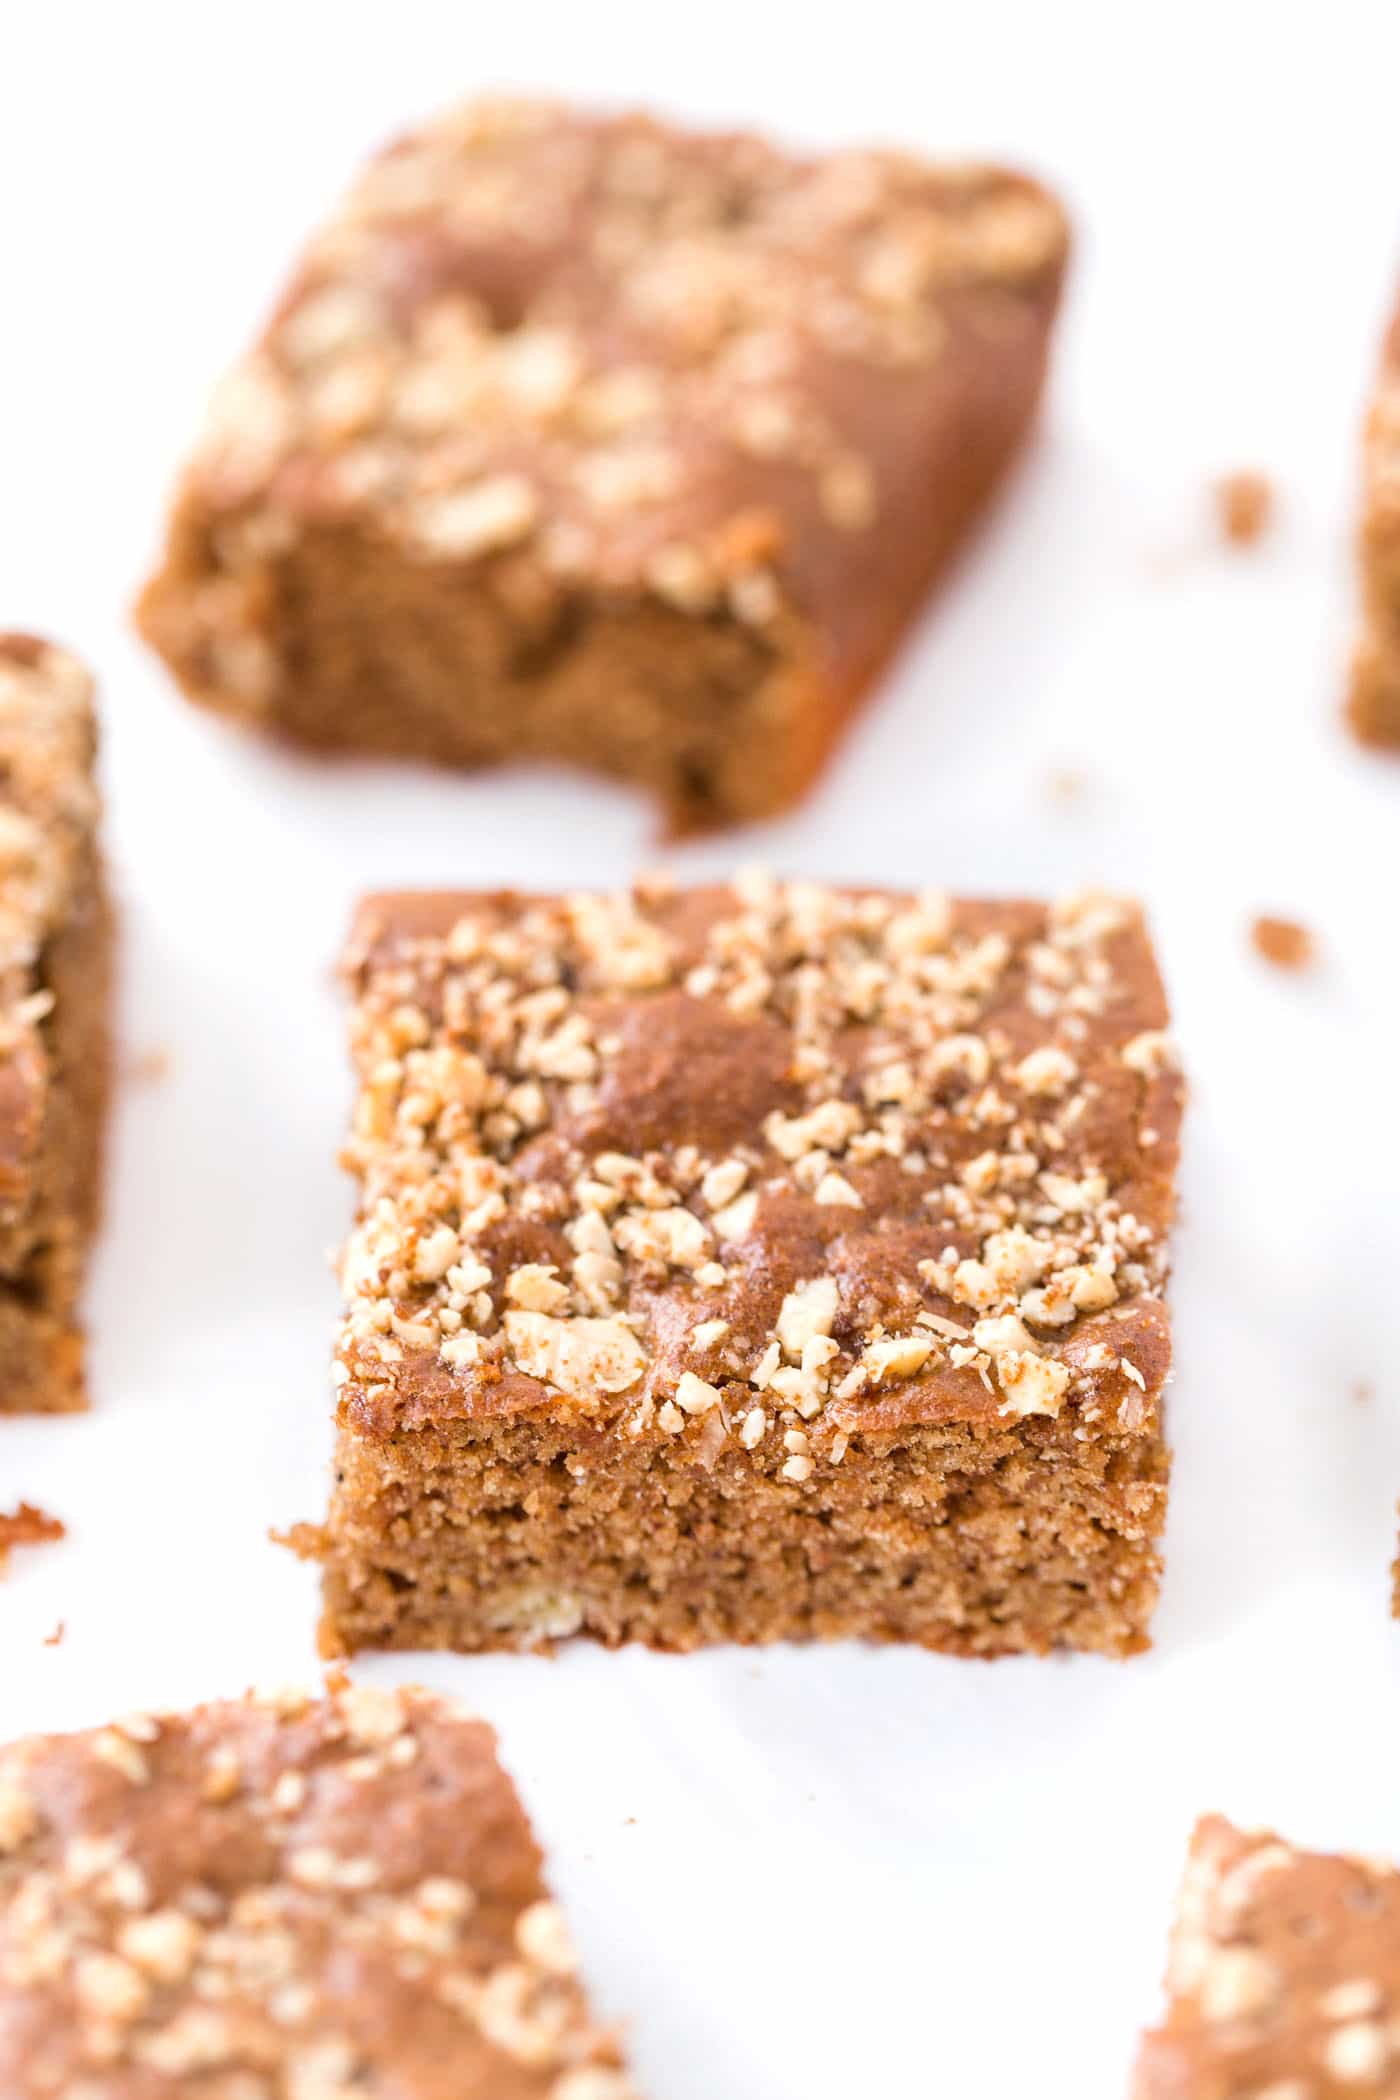 These FLOURLESS cashew butter bars are the perfect HEALTHY dessert!